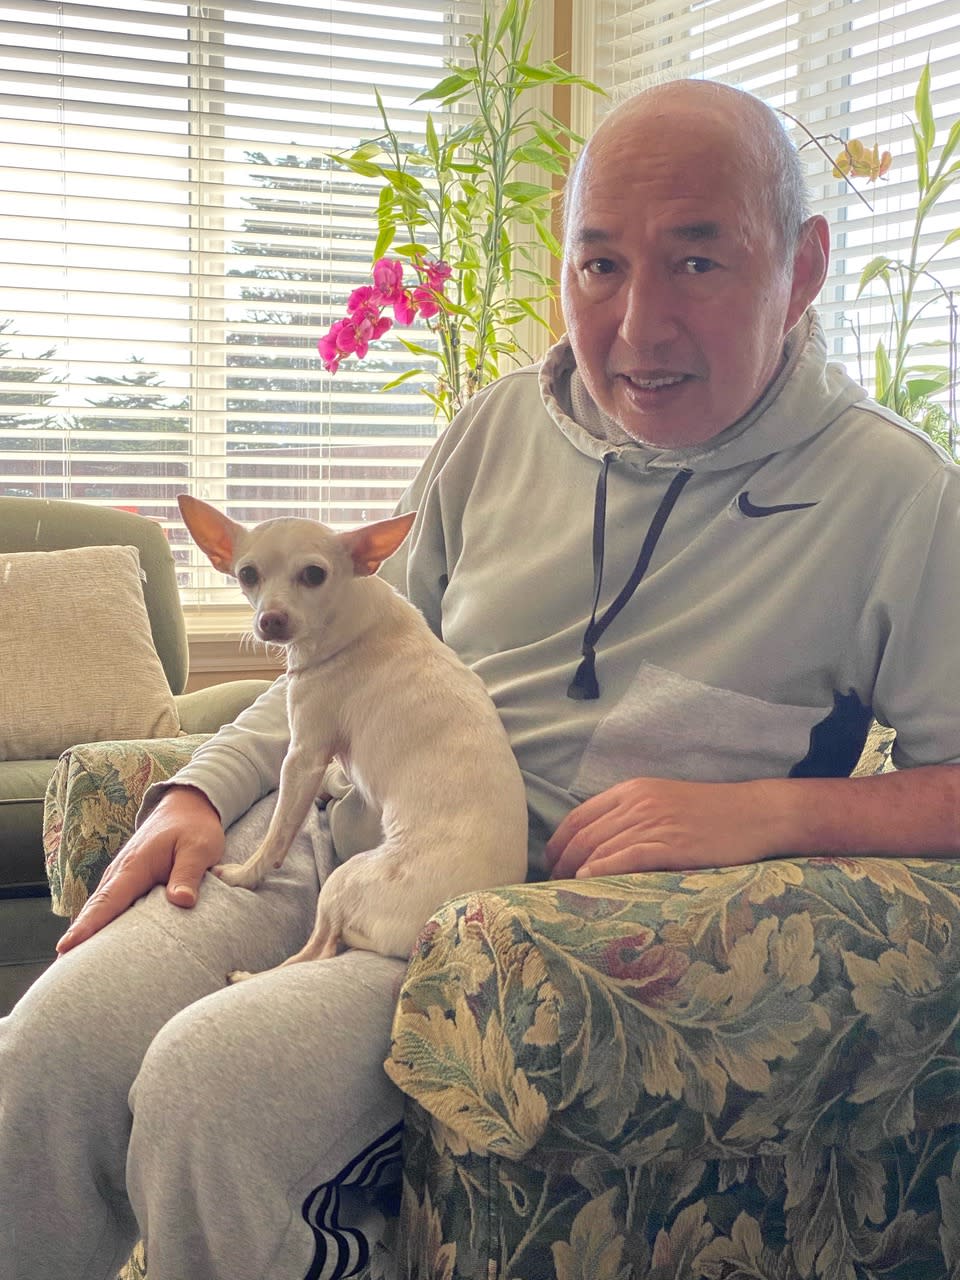 Johanna Carrington’s caregiver, Eddie Martinez, takes Gucci on daily walks and cooks chicken for him as a treat. Having a strong support system can help seniors successfully adopt pets. (Courtesy Debbie Carrington )